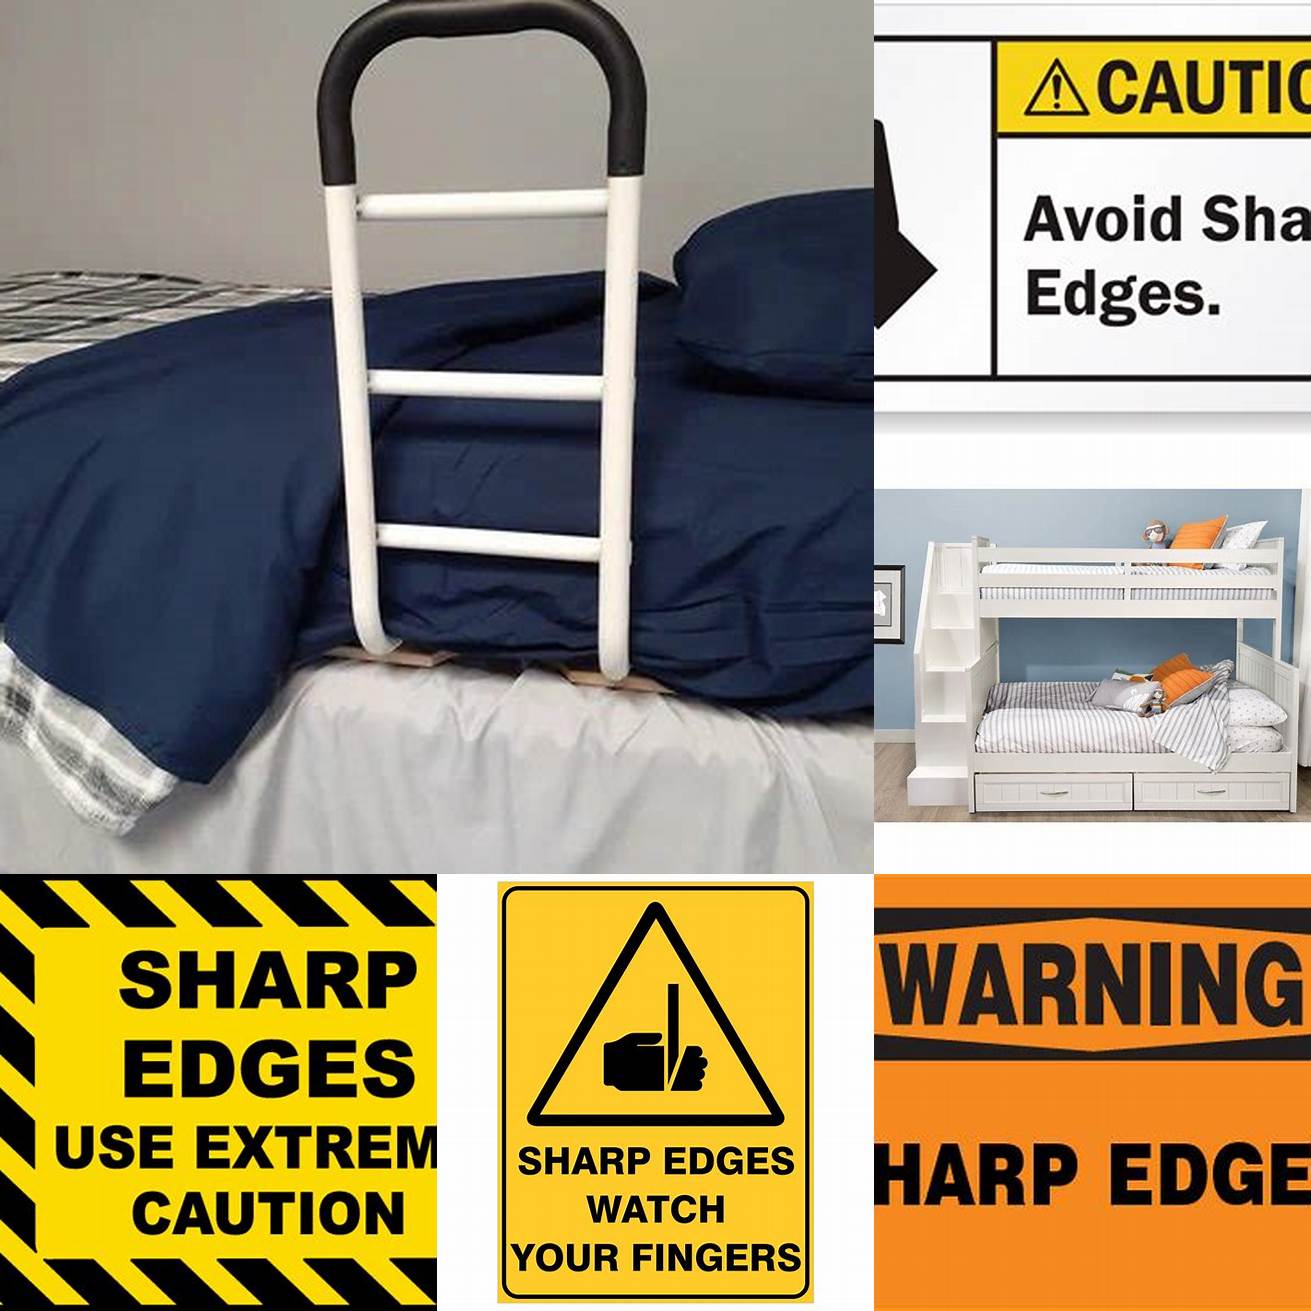 Make sure the bed meets safety standards and has no sharp edges or corners that could harm your child